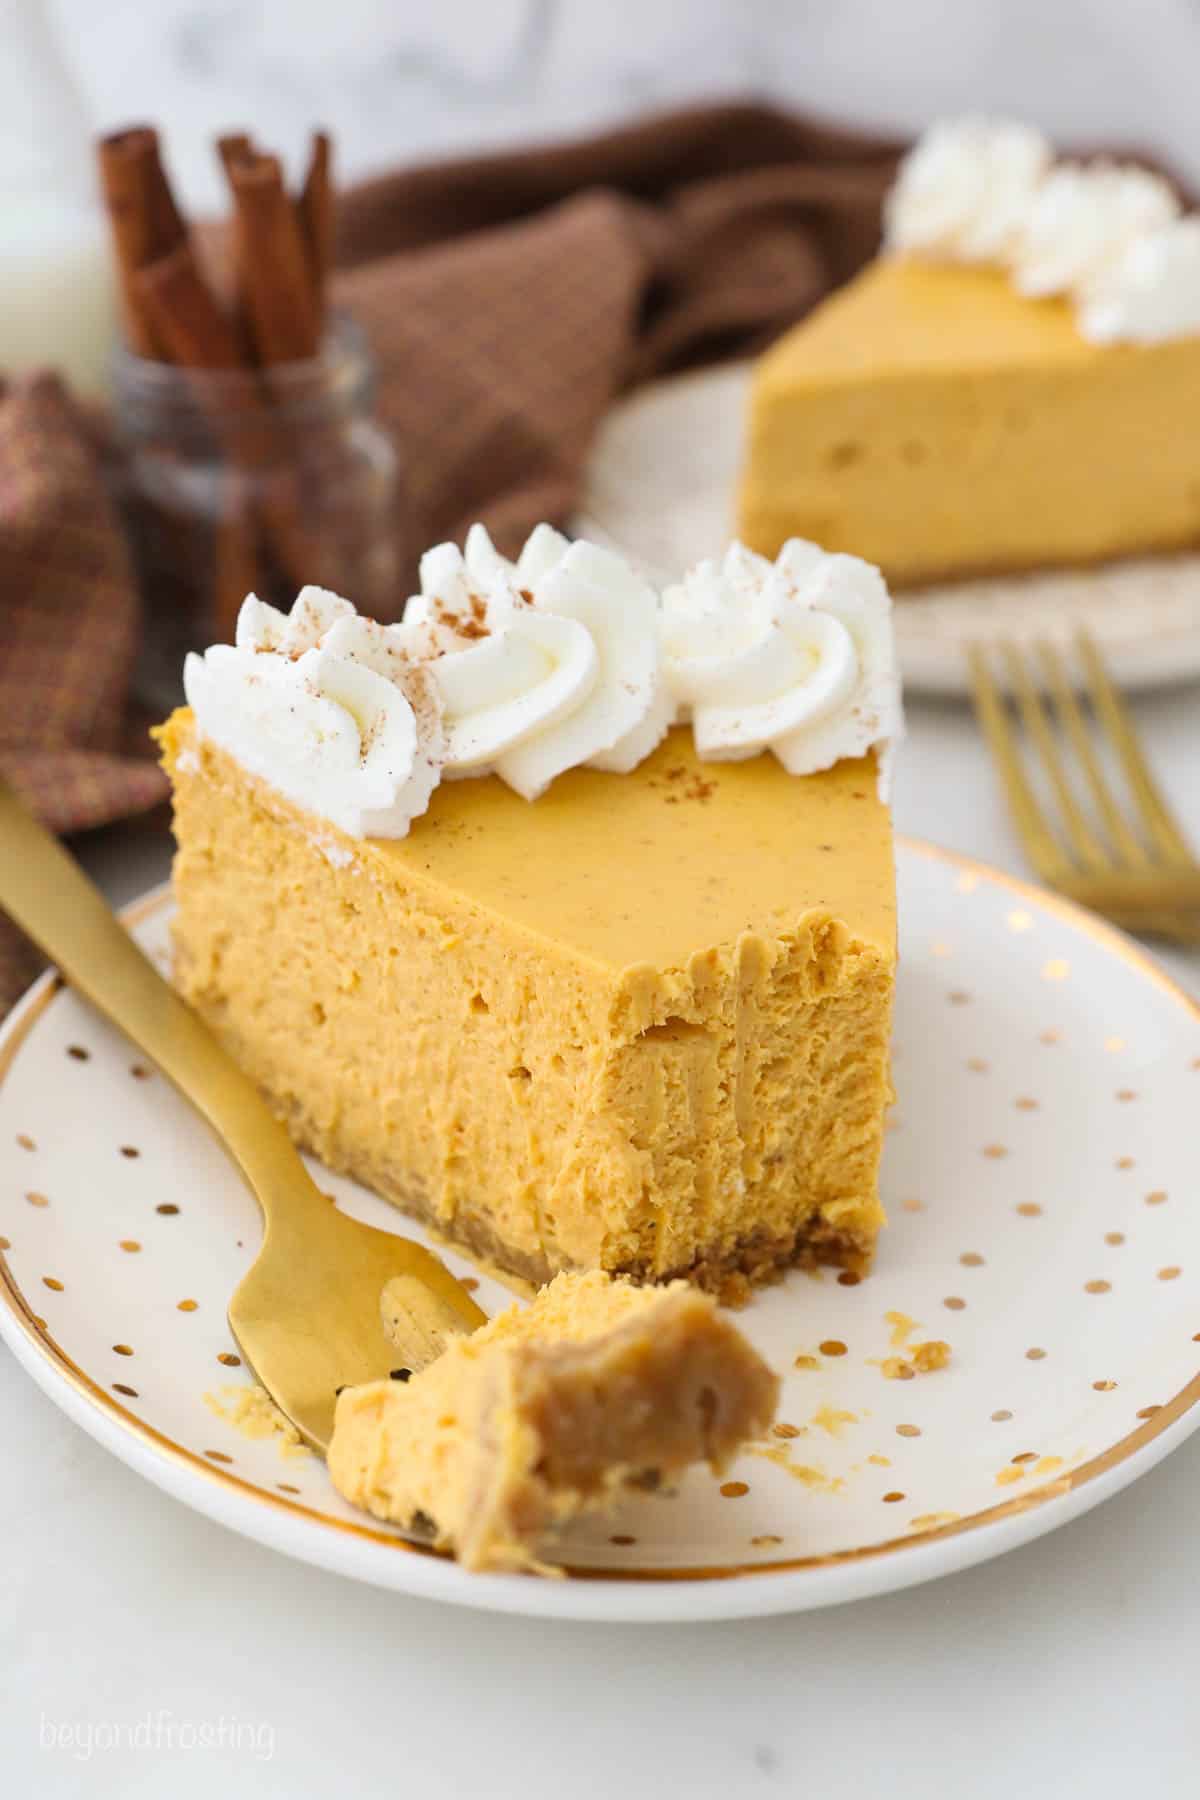 A piece of pumpkin cheesecake on a plate with one bite on a golden fork